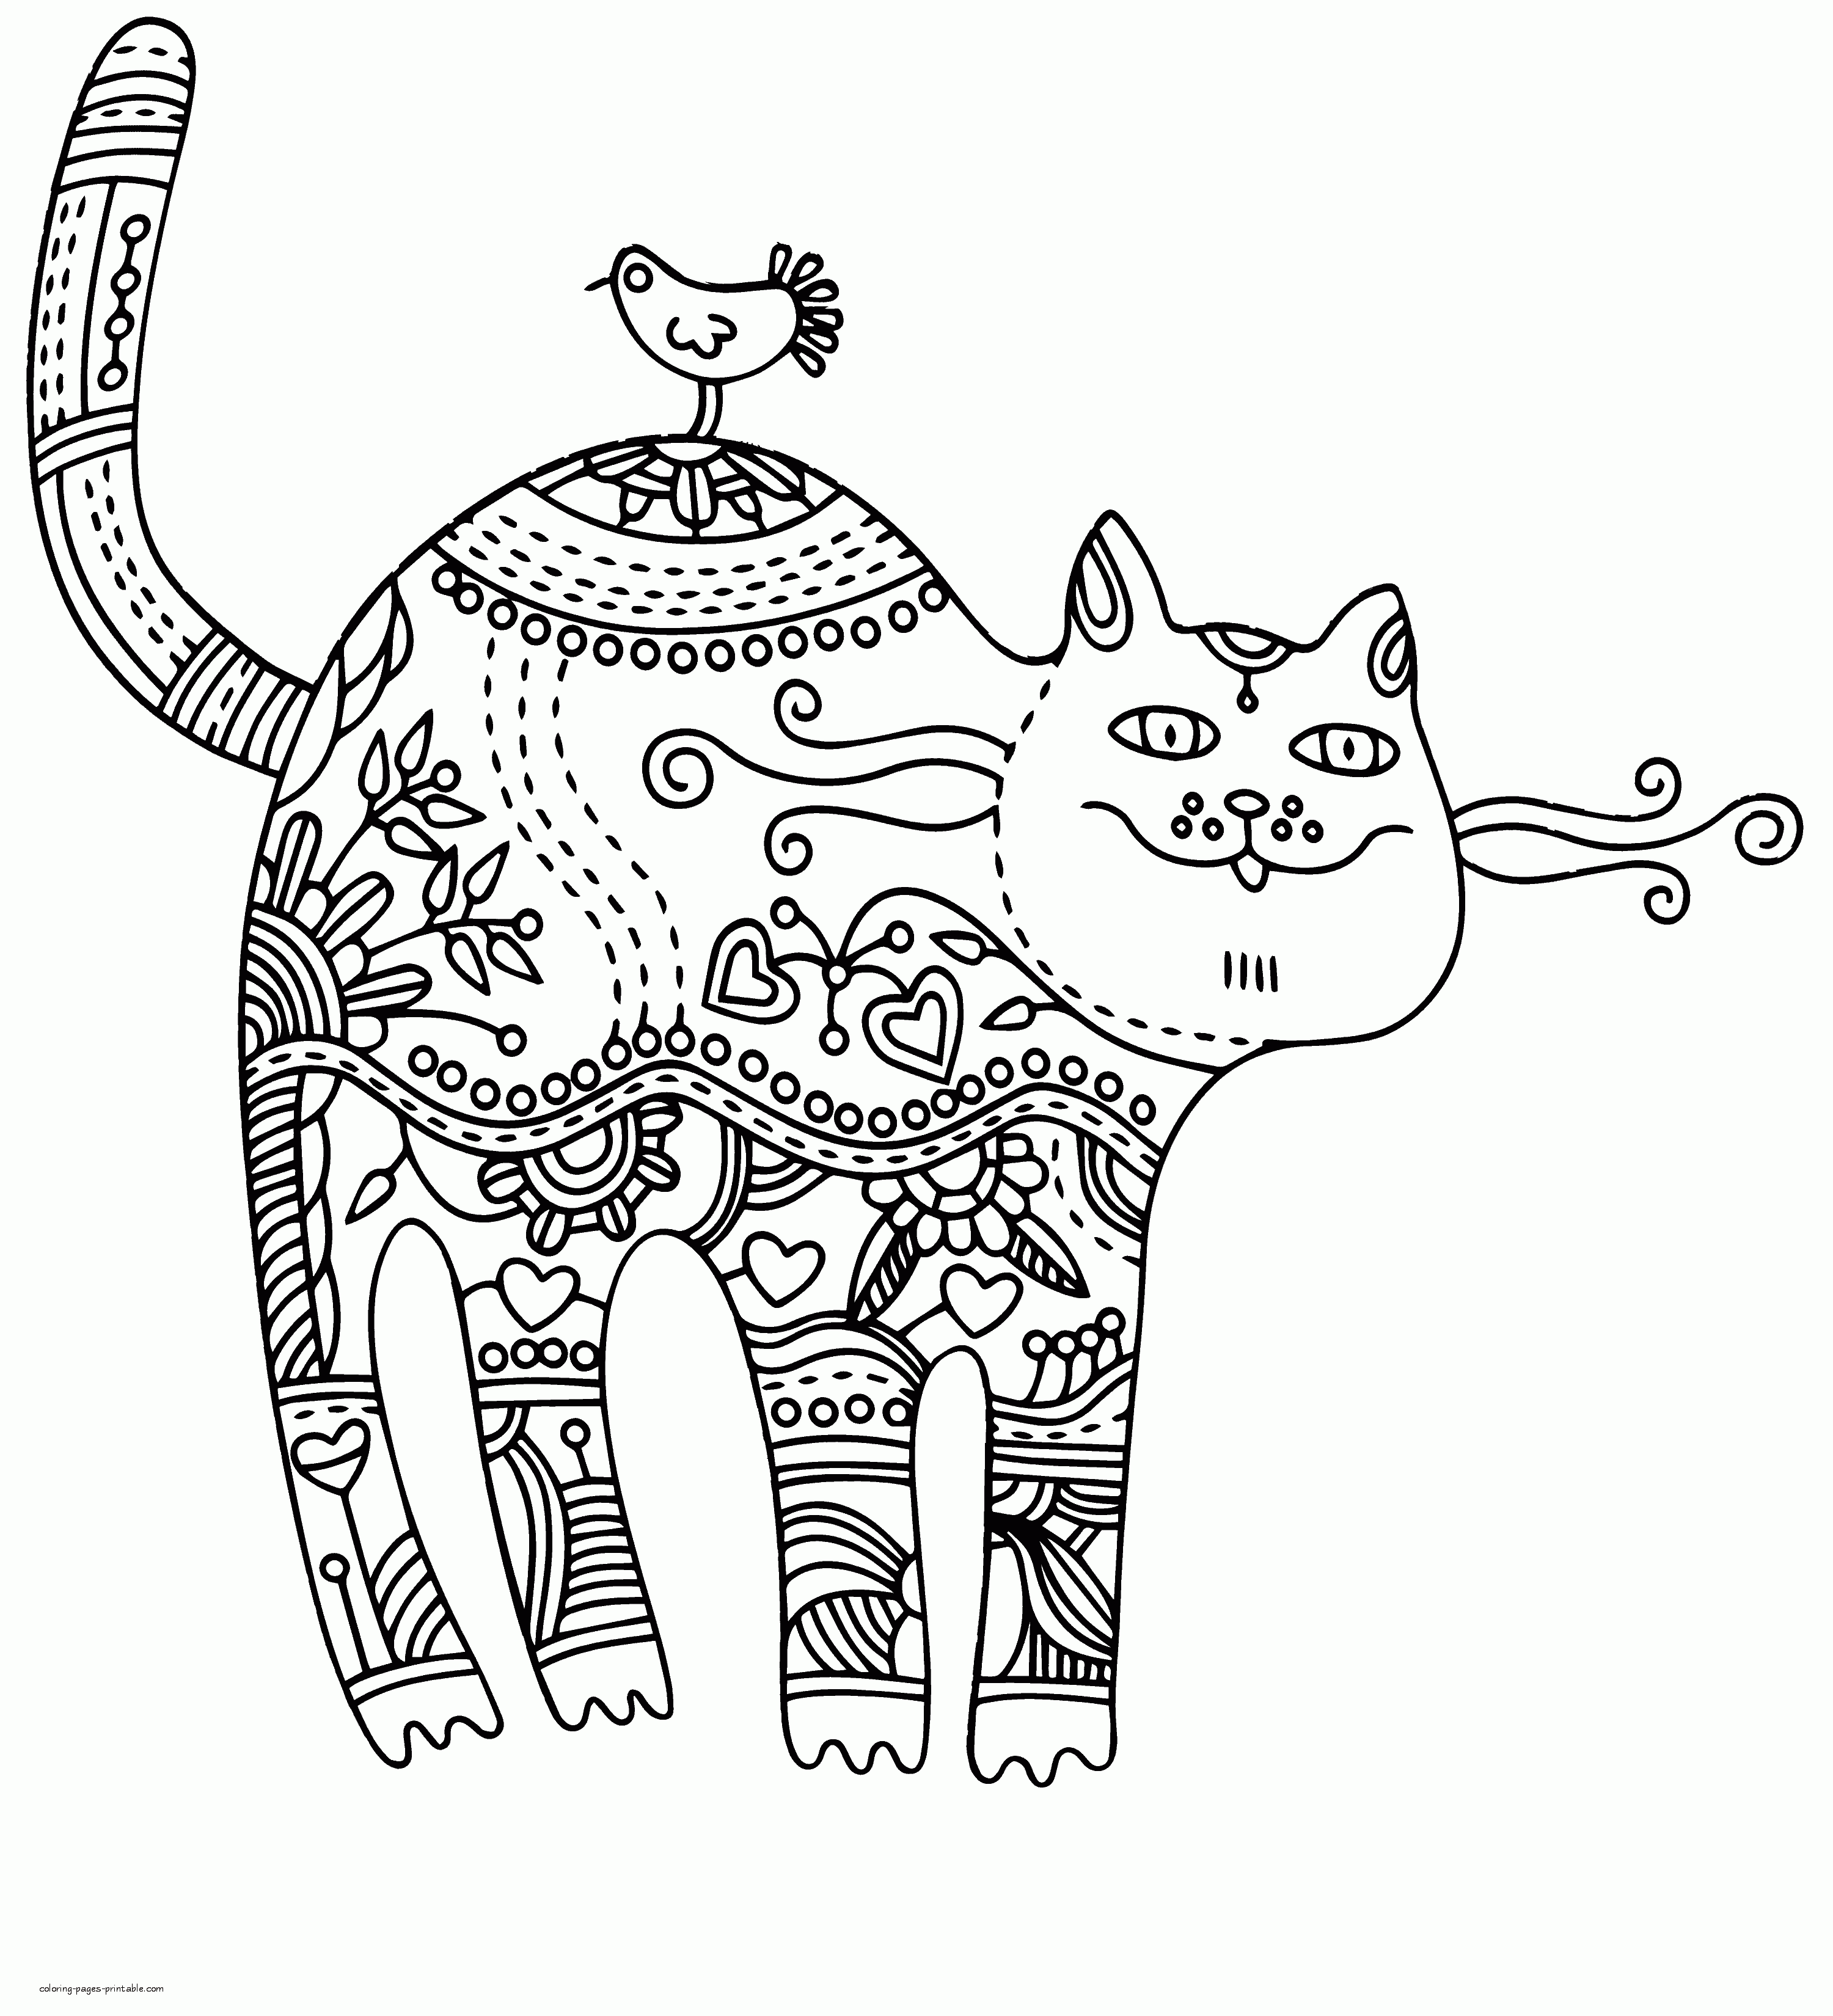 50-coloring-pages-for-adults-download